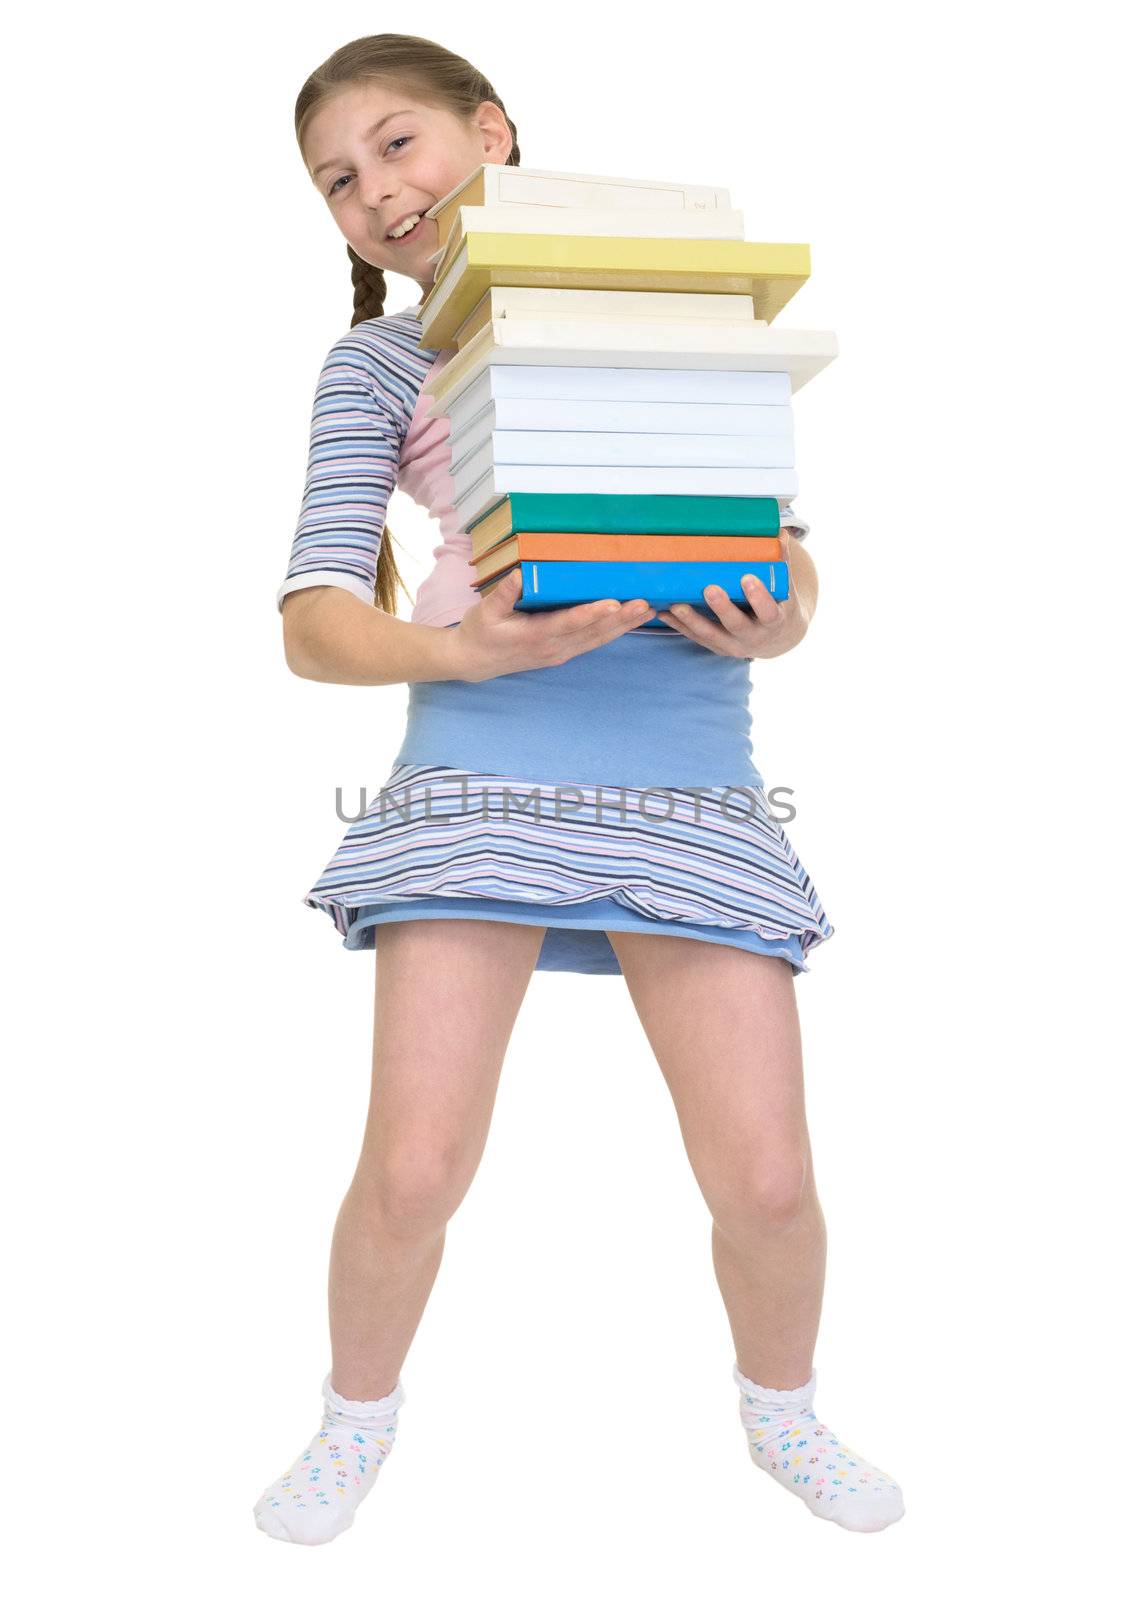 The schoolgirl has a large stack of textbooks